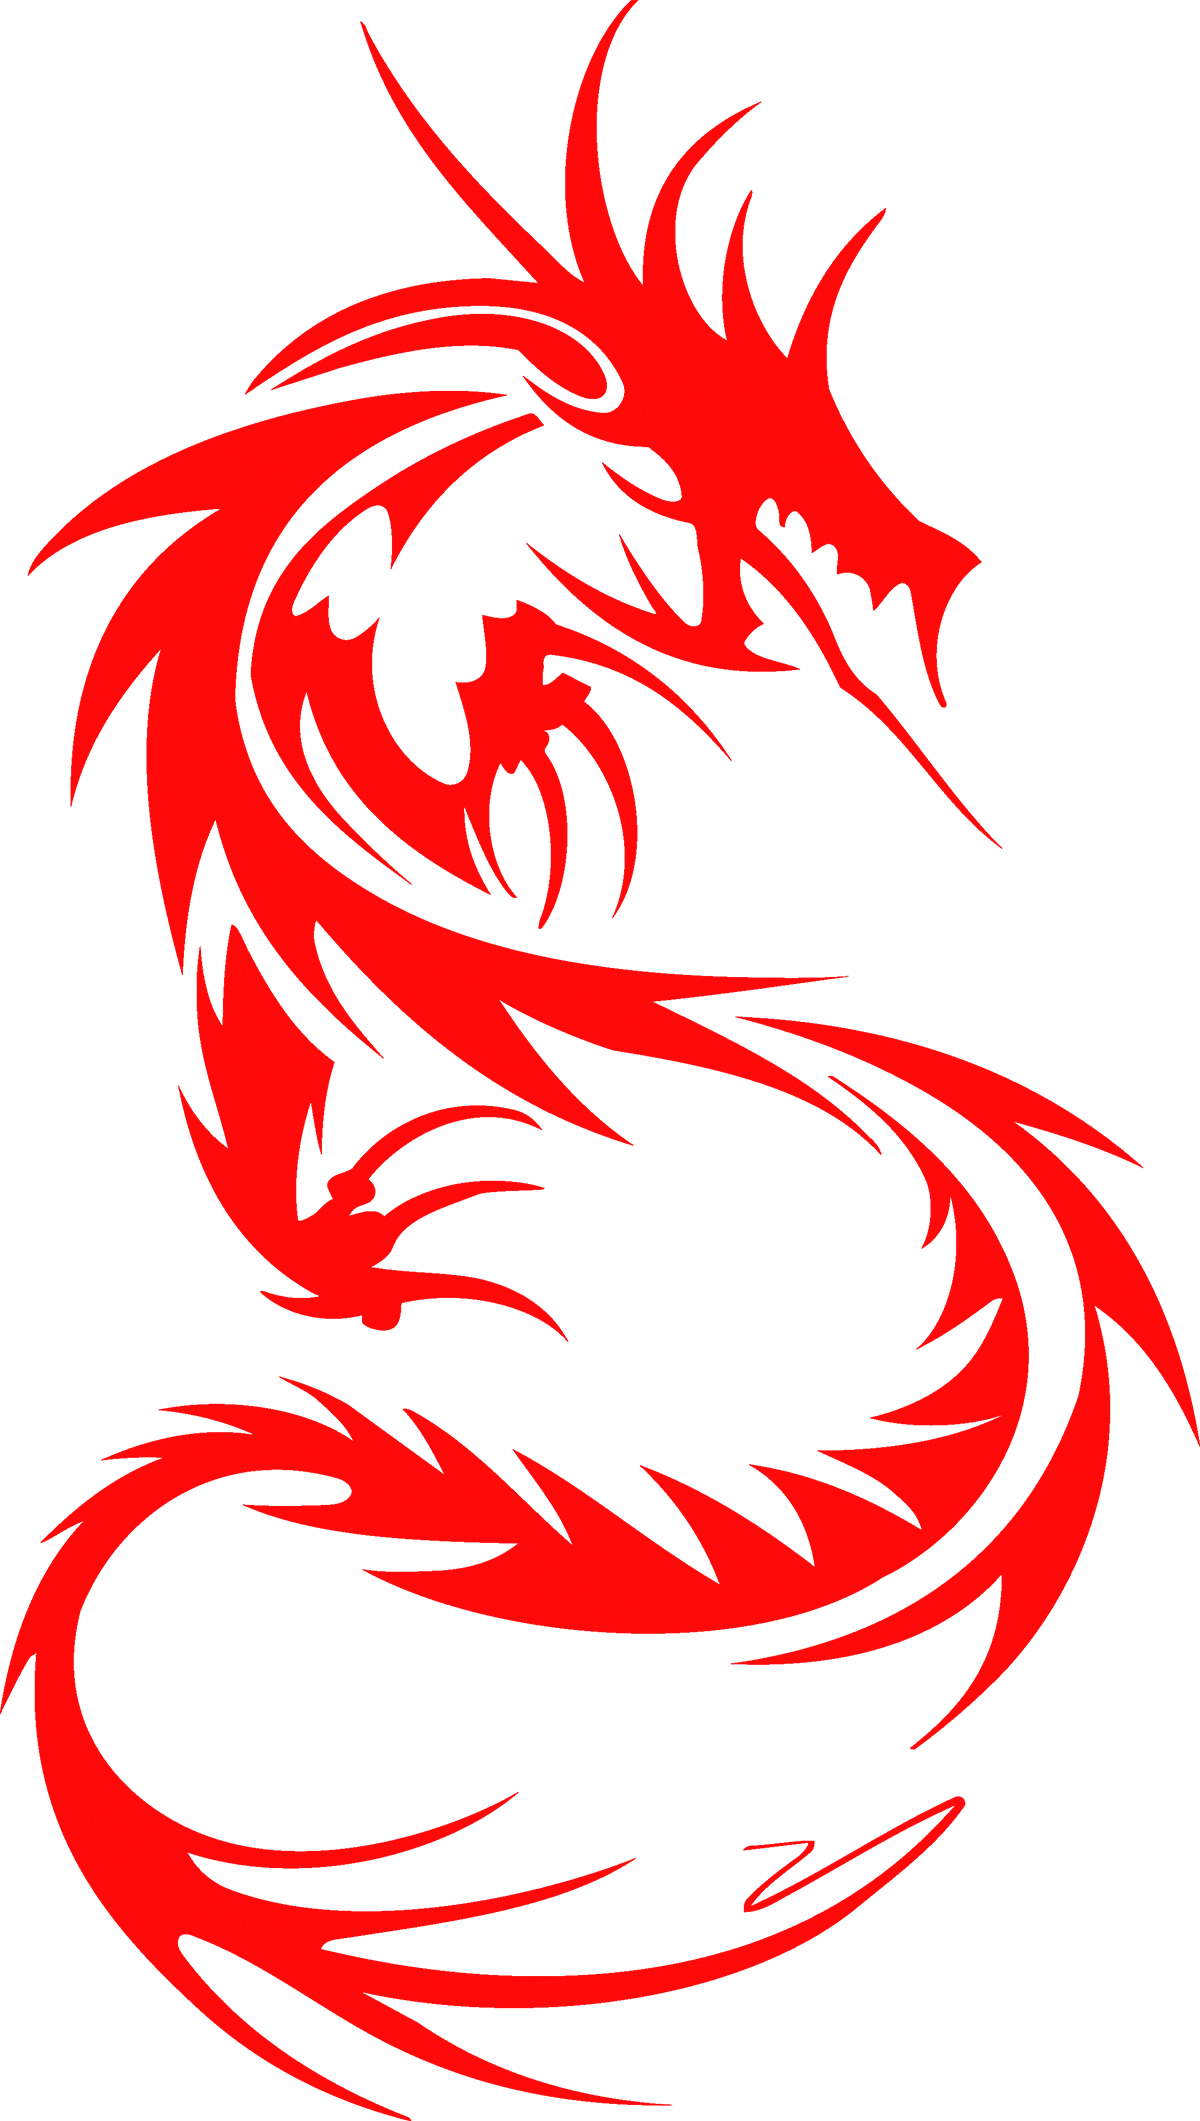 Paper-Cut Tattoo Sleeve Chinese Dragon Cover-Up PNG Image